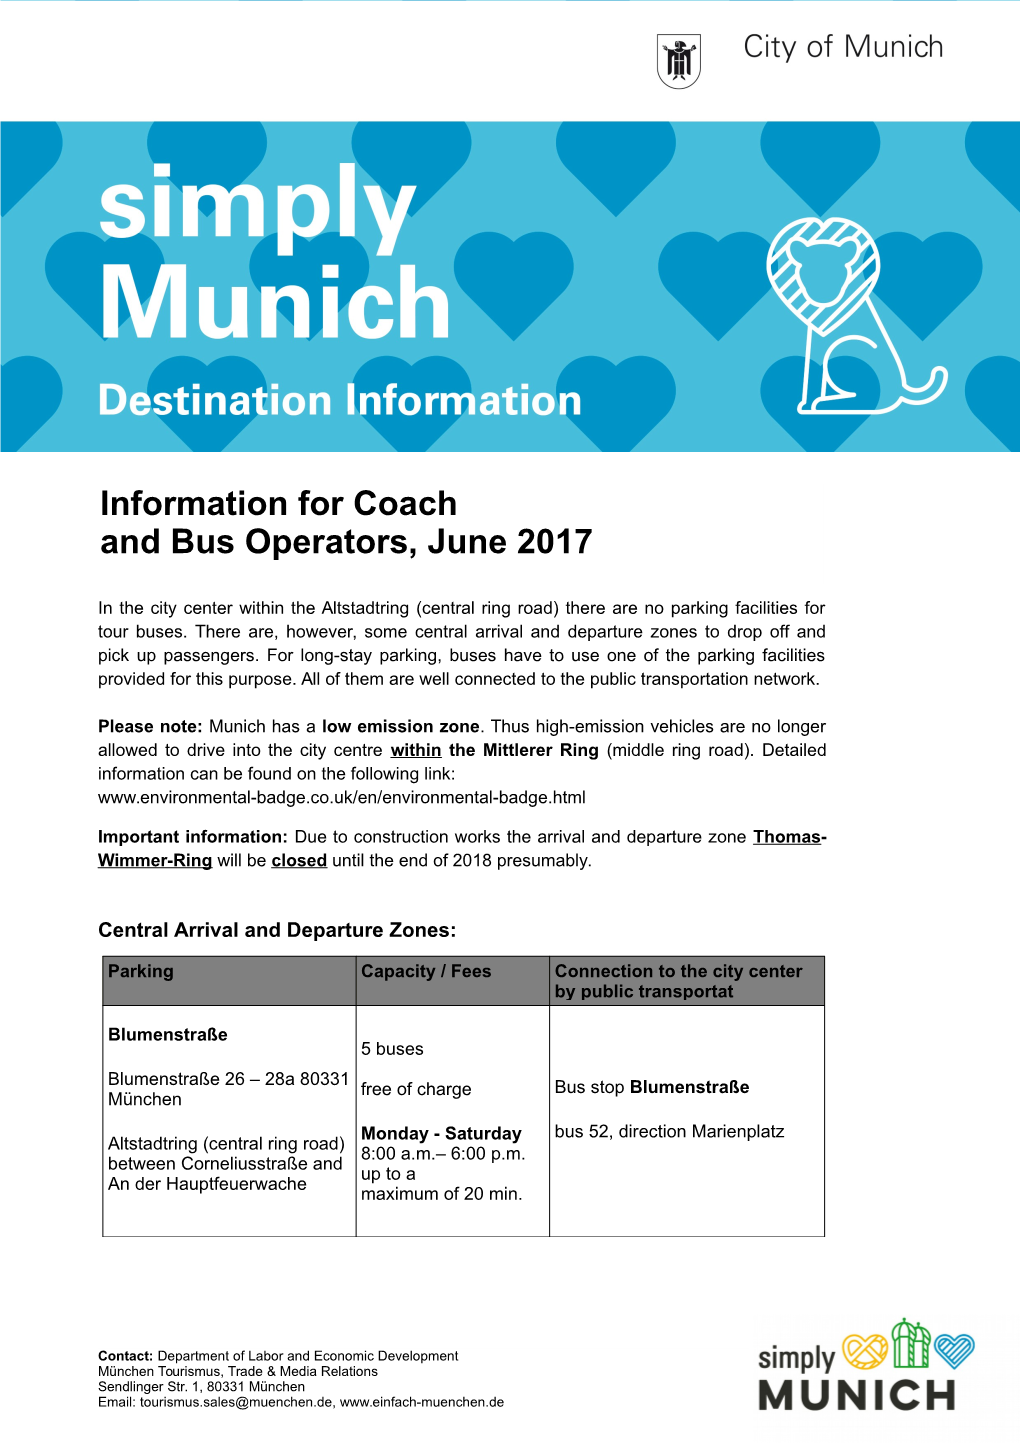 Information for Coach and Bus Operators, June 2017